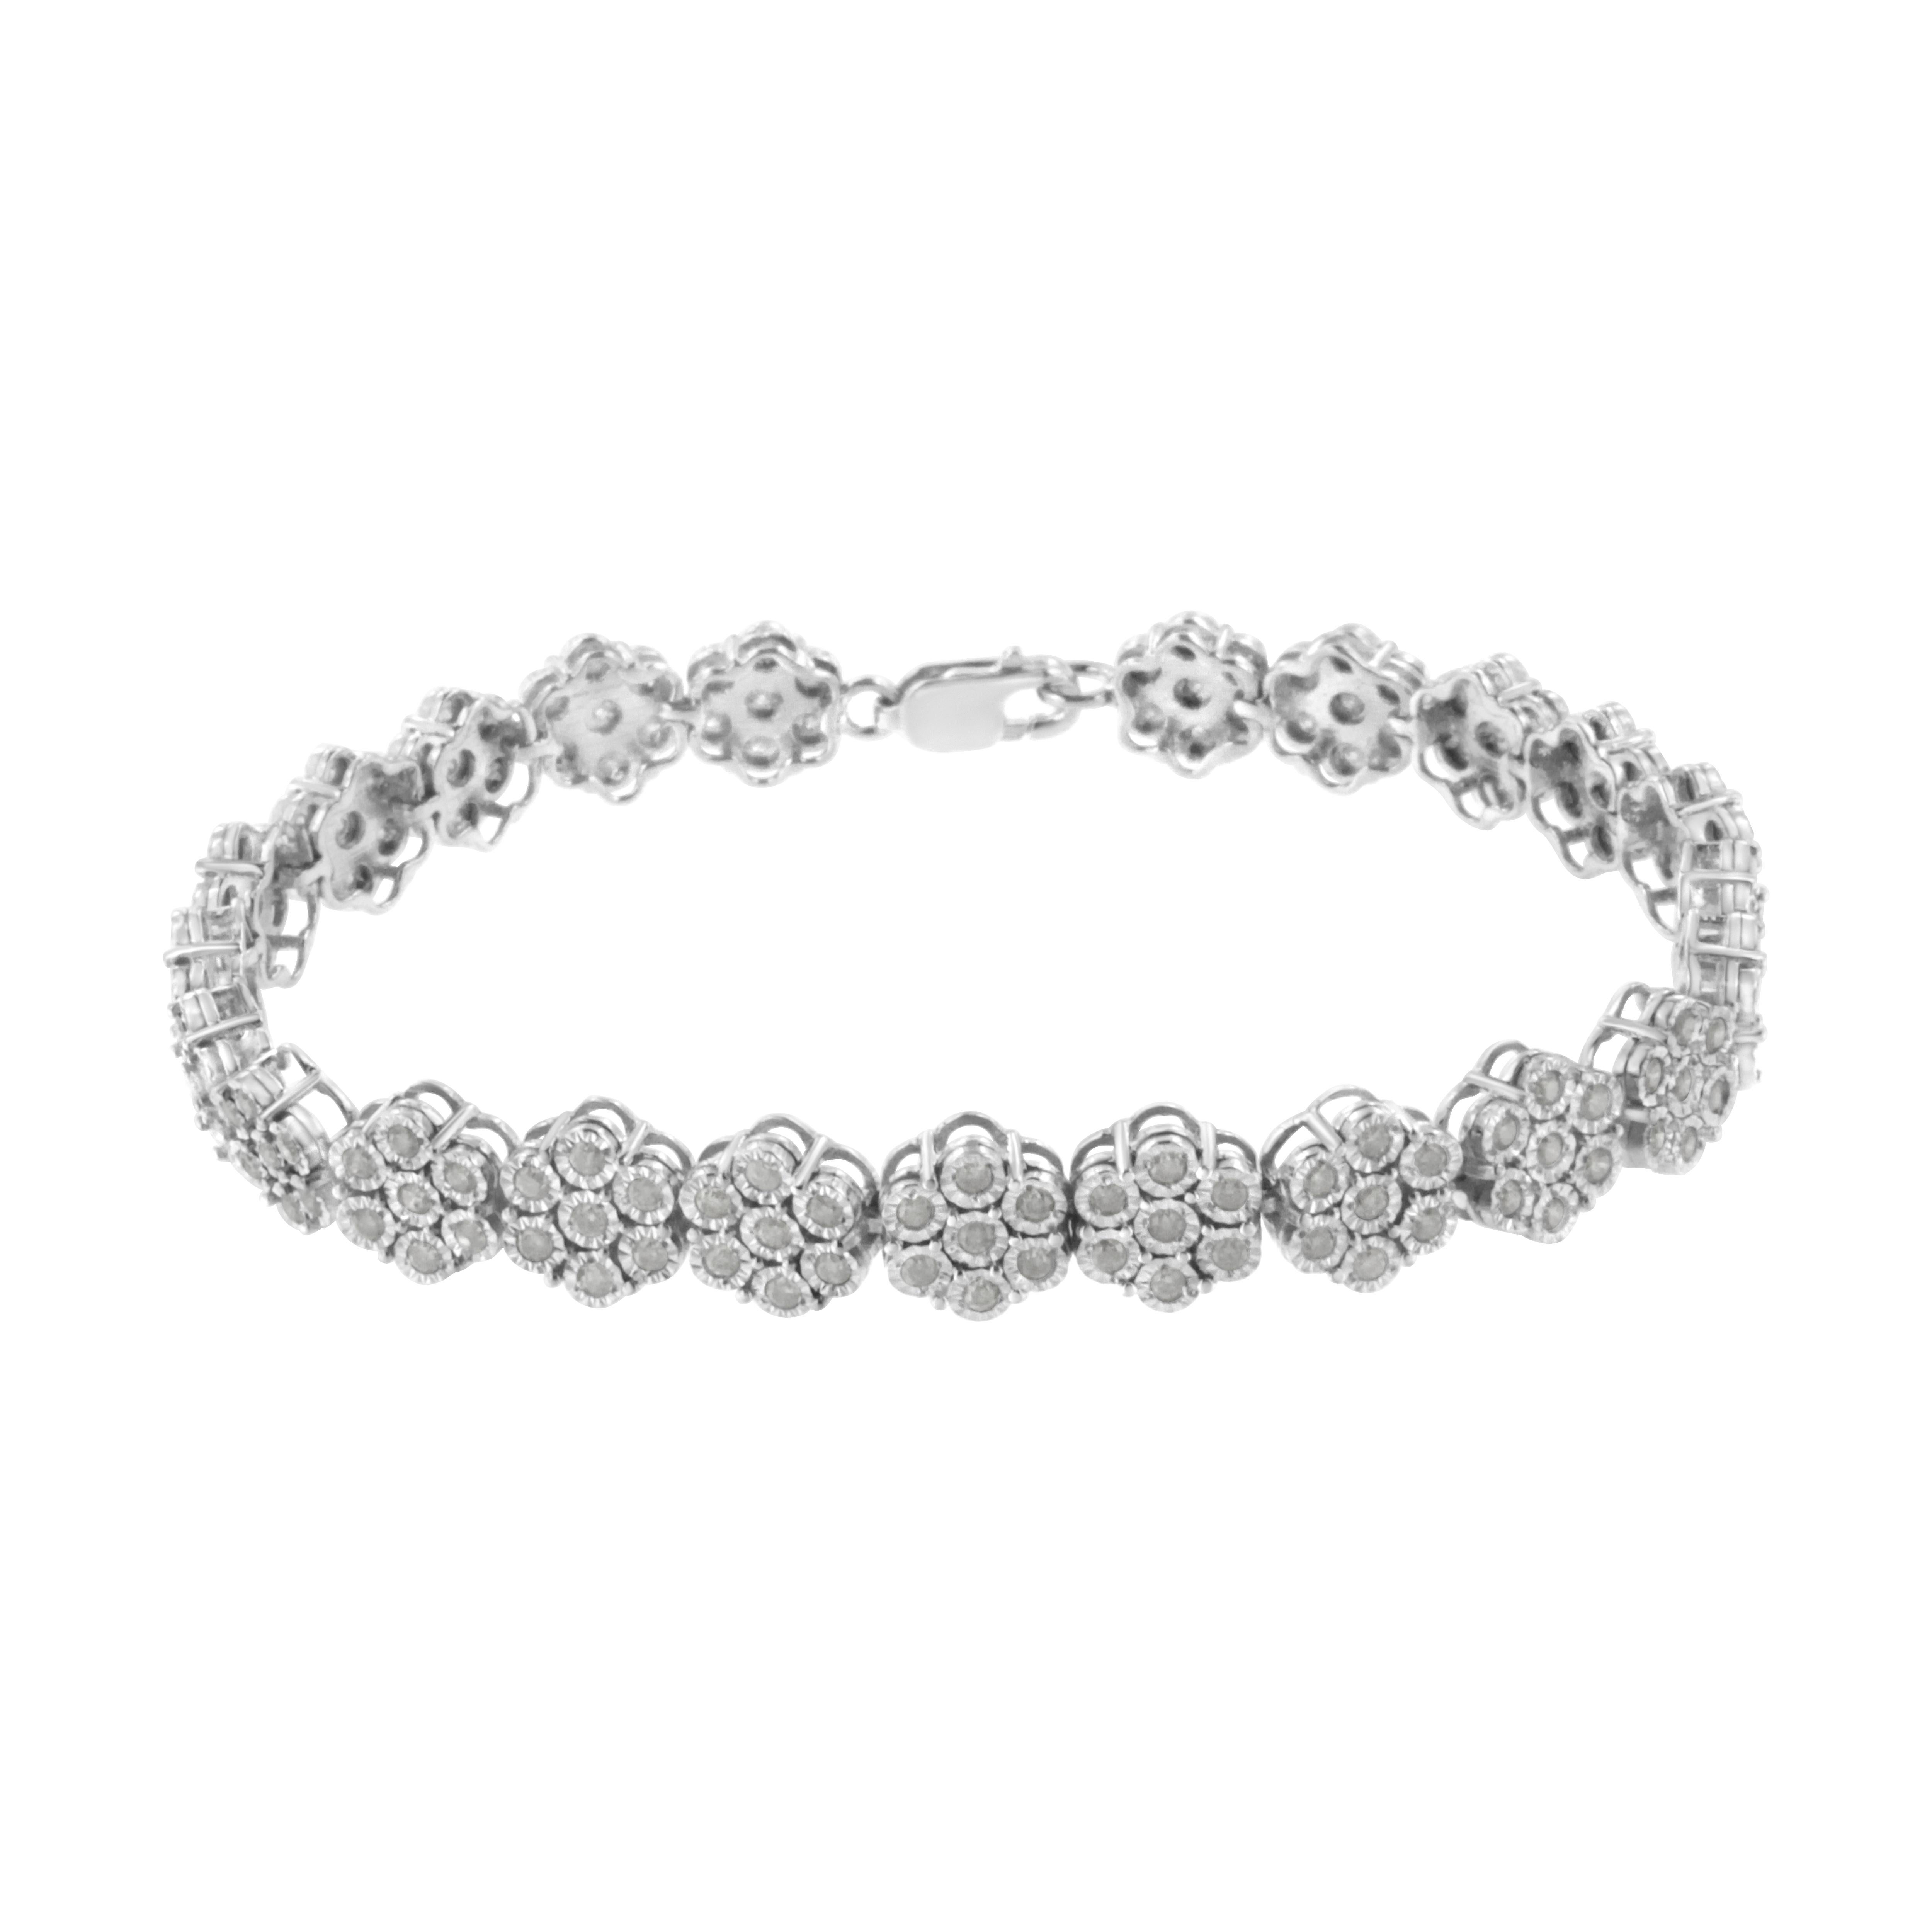 This wonderful flower link bracelet is fashioned in sterling silver and showcases 2 carats TDW in diamonds. One hundred and sixty one promo quality round cut diamonds glisten in this design. Seven miracle set diamonds create each one of the flower